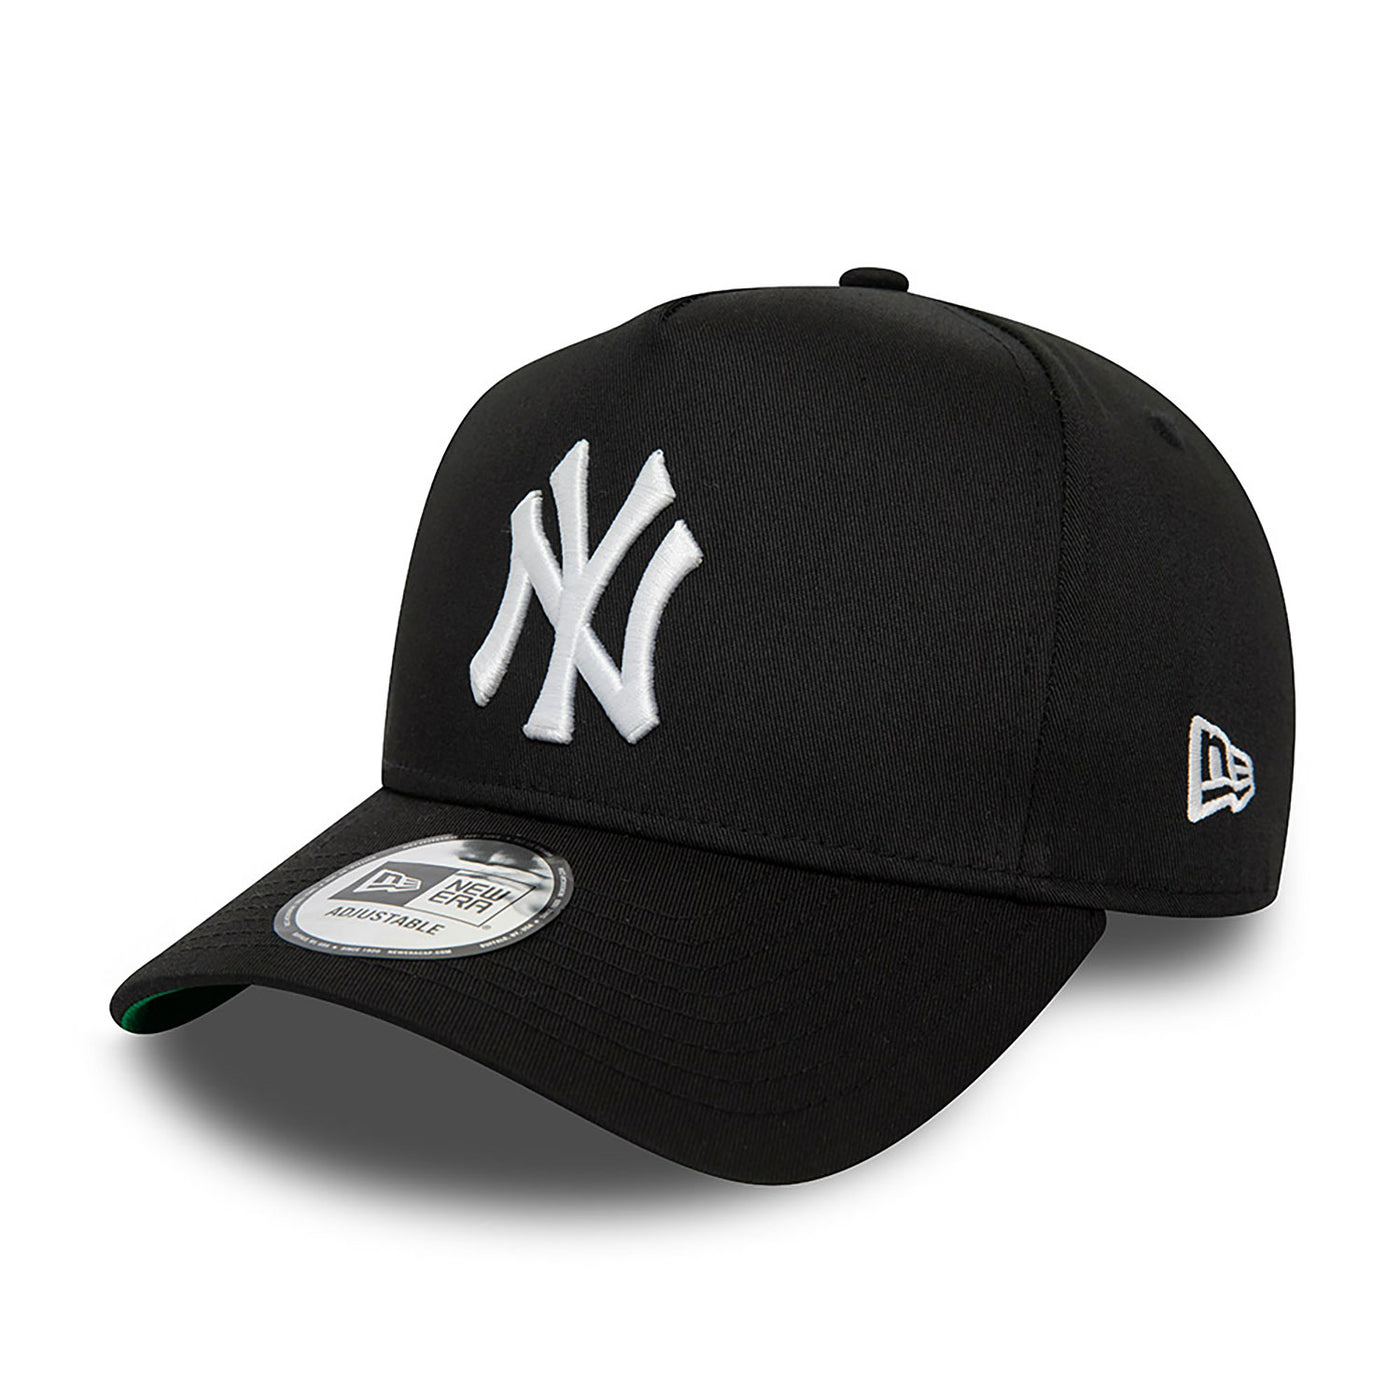 New Era World Series Patch 9Forty A-Frame cap NY Yankees black